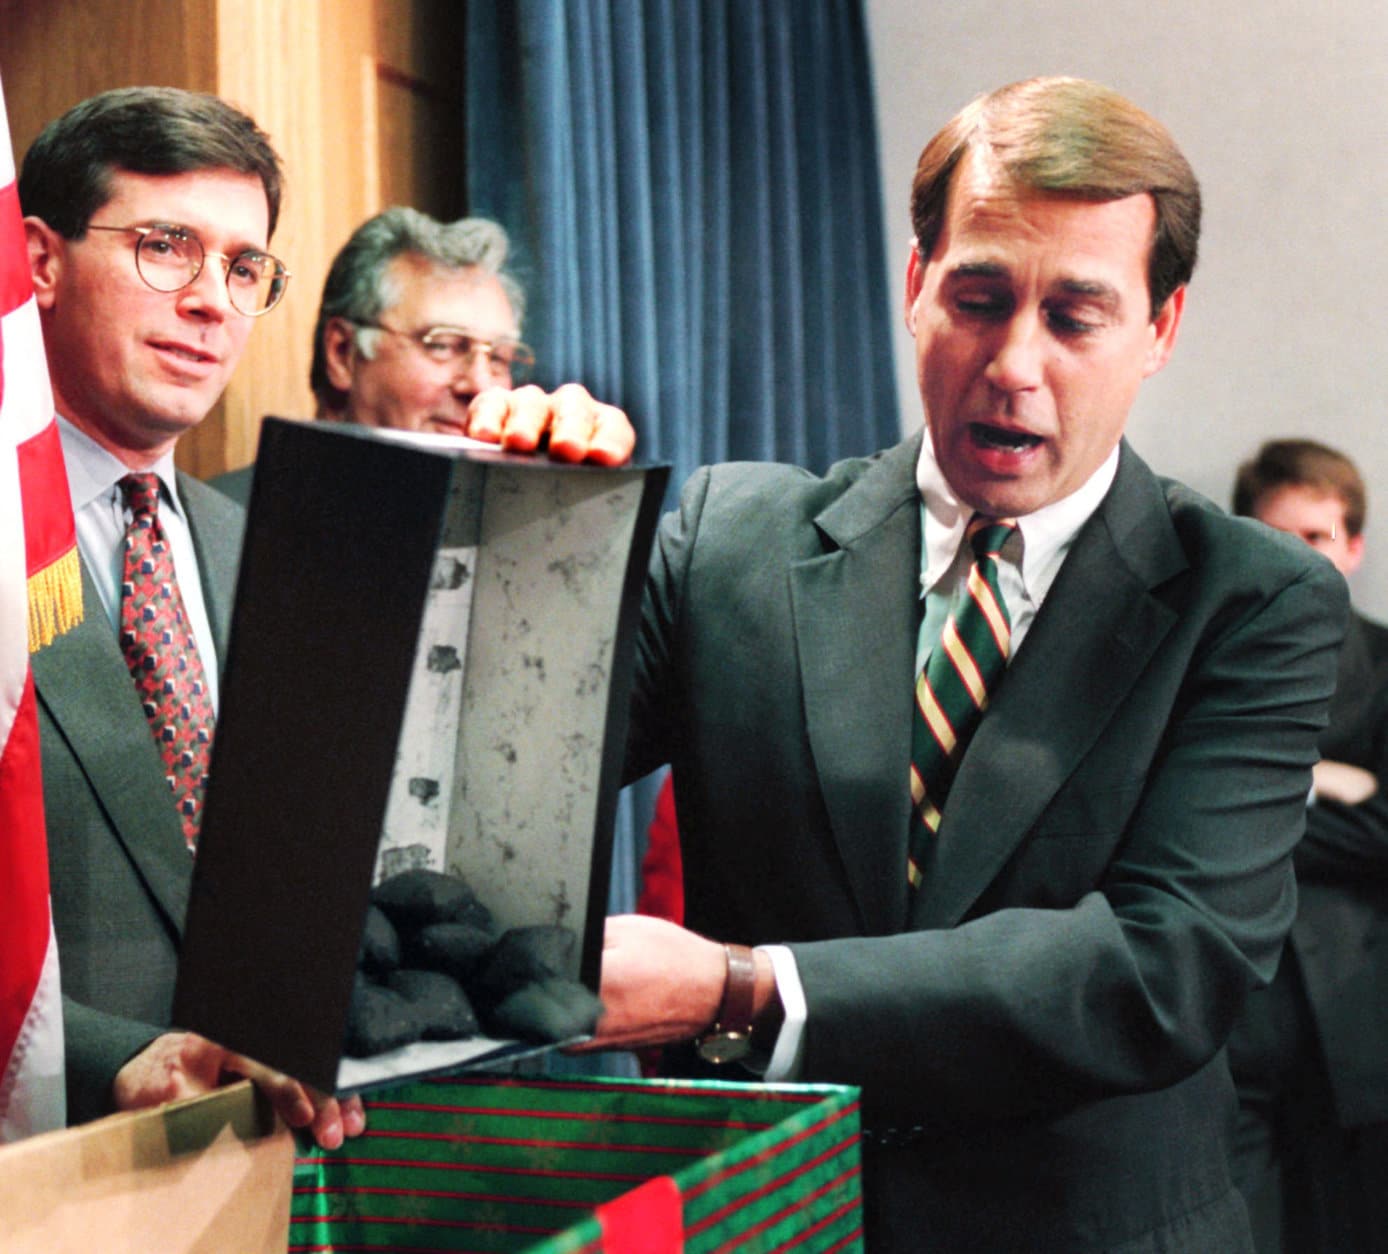 FILE - In this Dec. 21, 1995, file photo Rep. John Boehner, R-Ohio, dumps out coal, his so-called Christmas gift to President Clinton, during a news conference on the federal budget on Capitol Hill. The White House and Congressional Republicans tried to restart balanced budget talks after the sixth day of a partial government shutdown. Then, as now in 2011, a Democratic president clashed over spending priorities with a recently installed Republican House majority. (AP Photo/Denis Paquin, File)